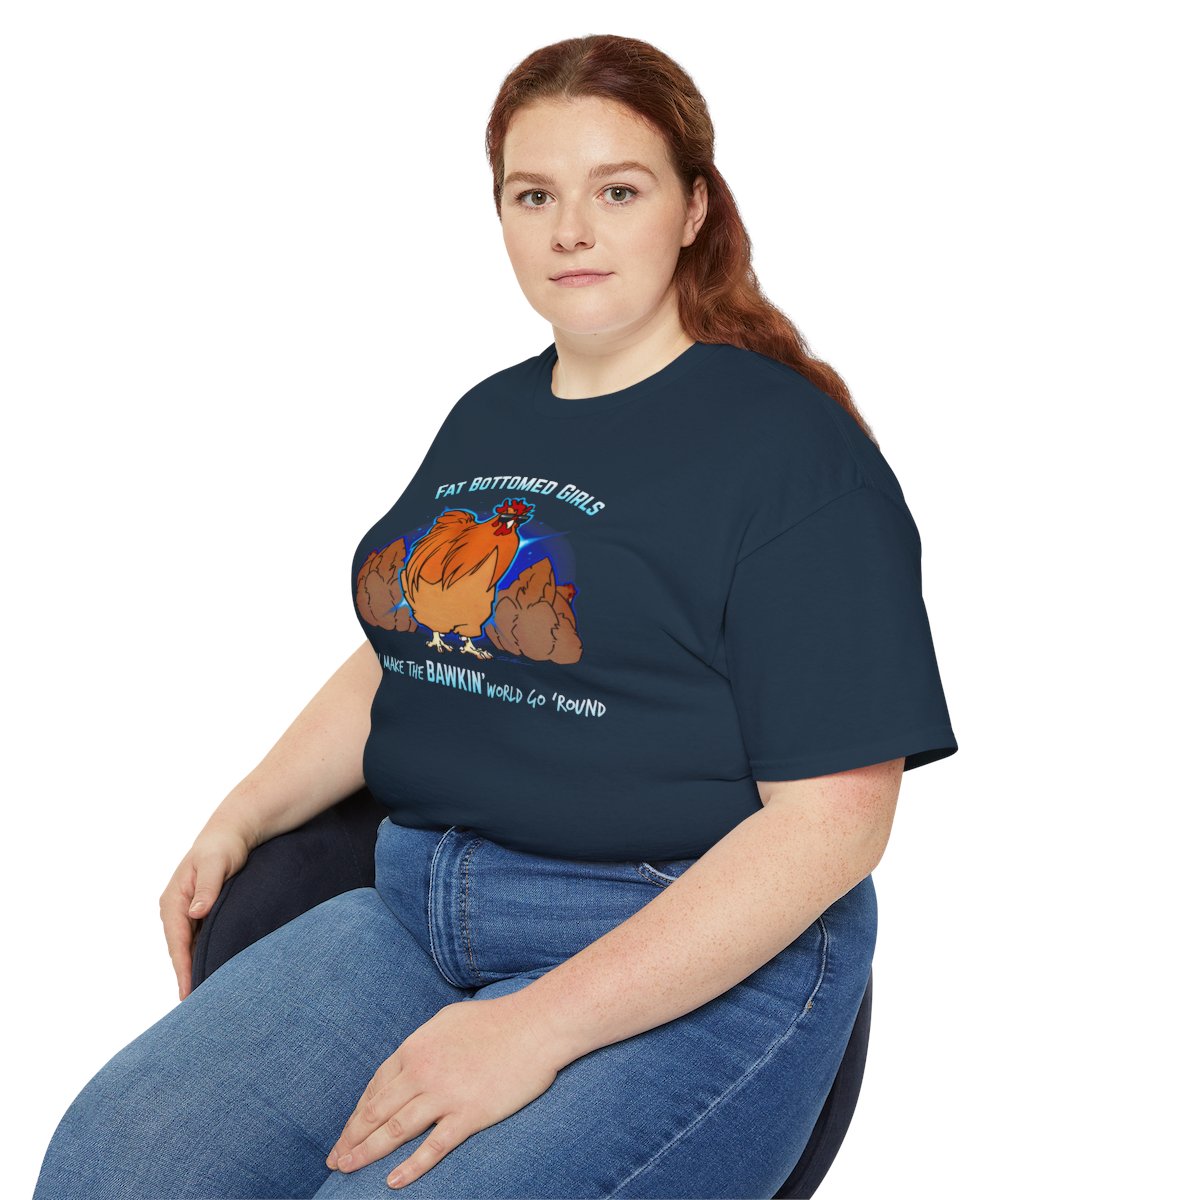 Fat Bottomed Girls - Unisex Ultra Cotton Tee product thumbnail image